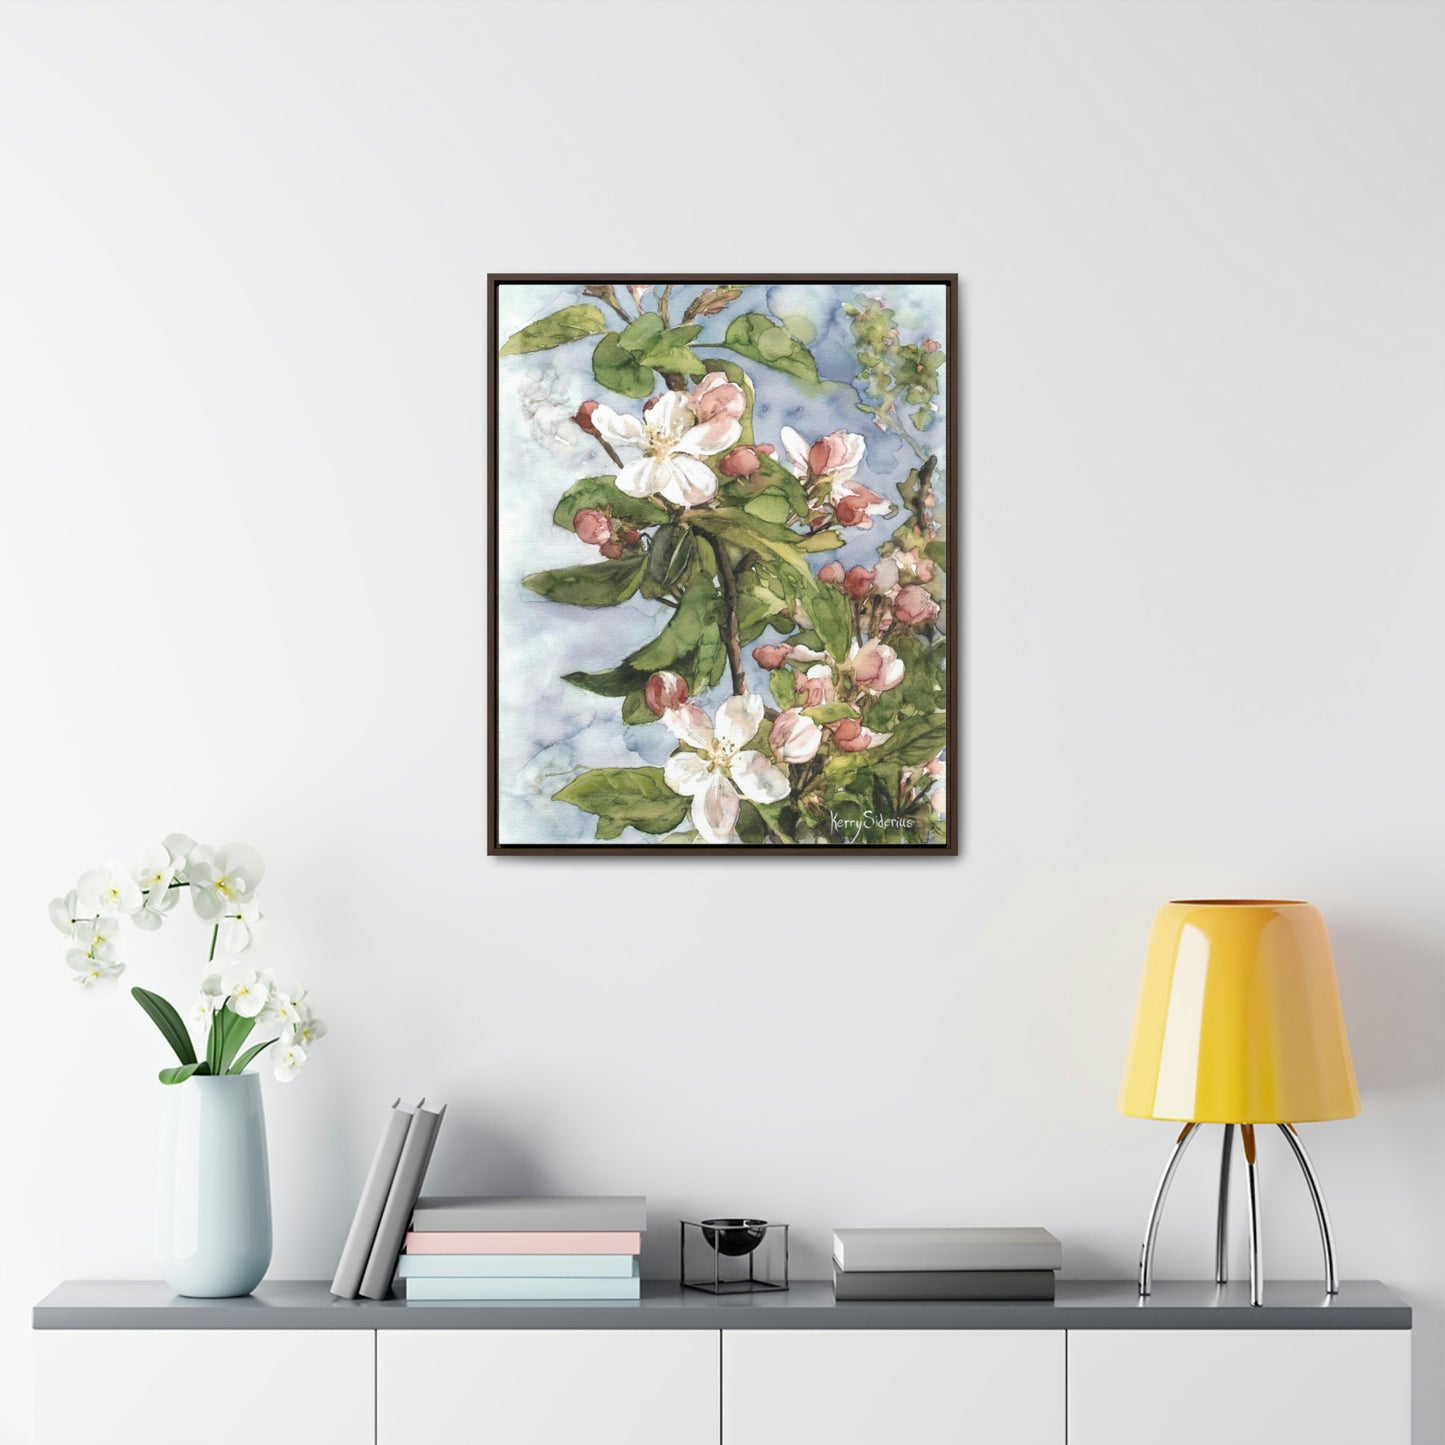 "Wenatchee Apple Blossoms" Gallery Wrapped Wood Framed Canvas (Walnut & Black) - Kerry Siderius Art 